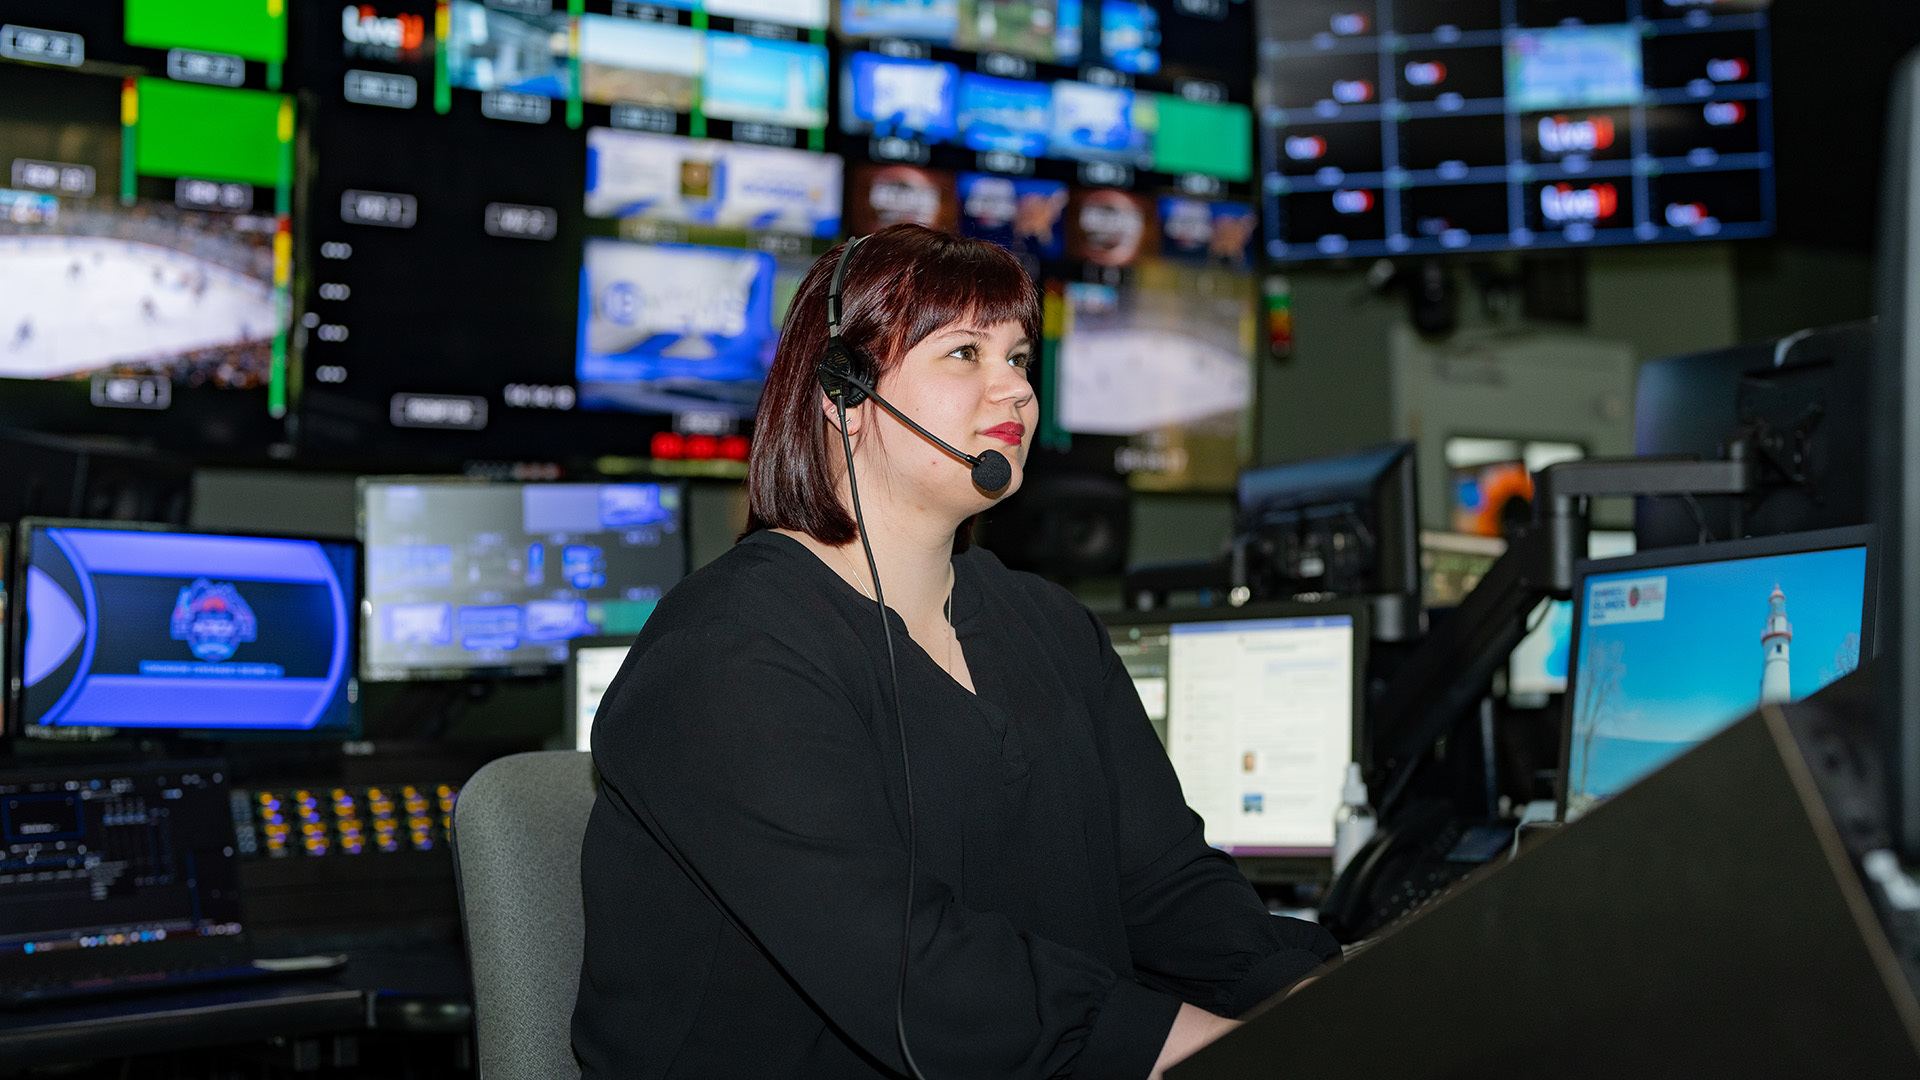 A person wearing a headset sits in a TV news control room.